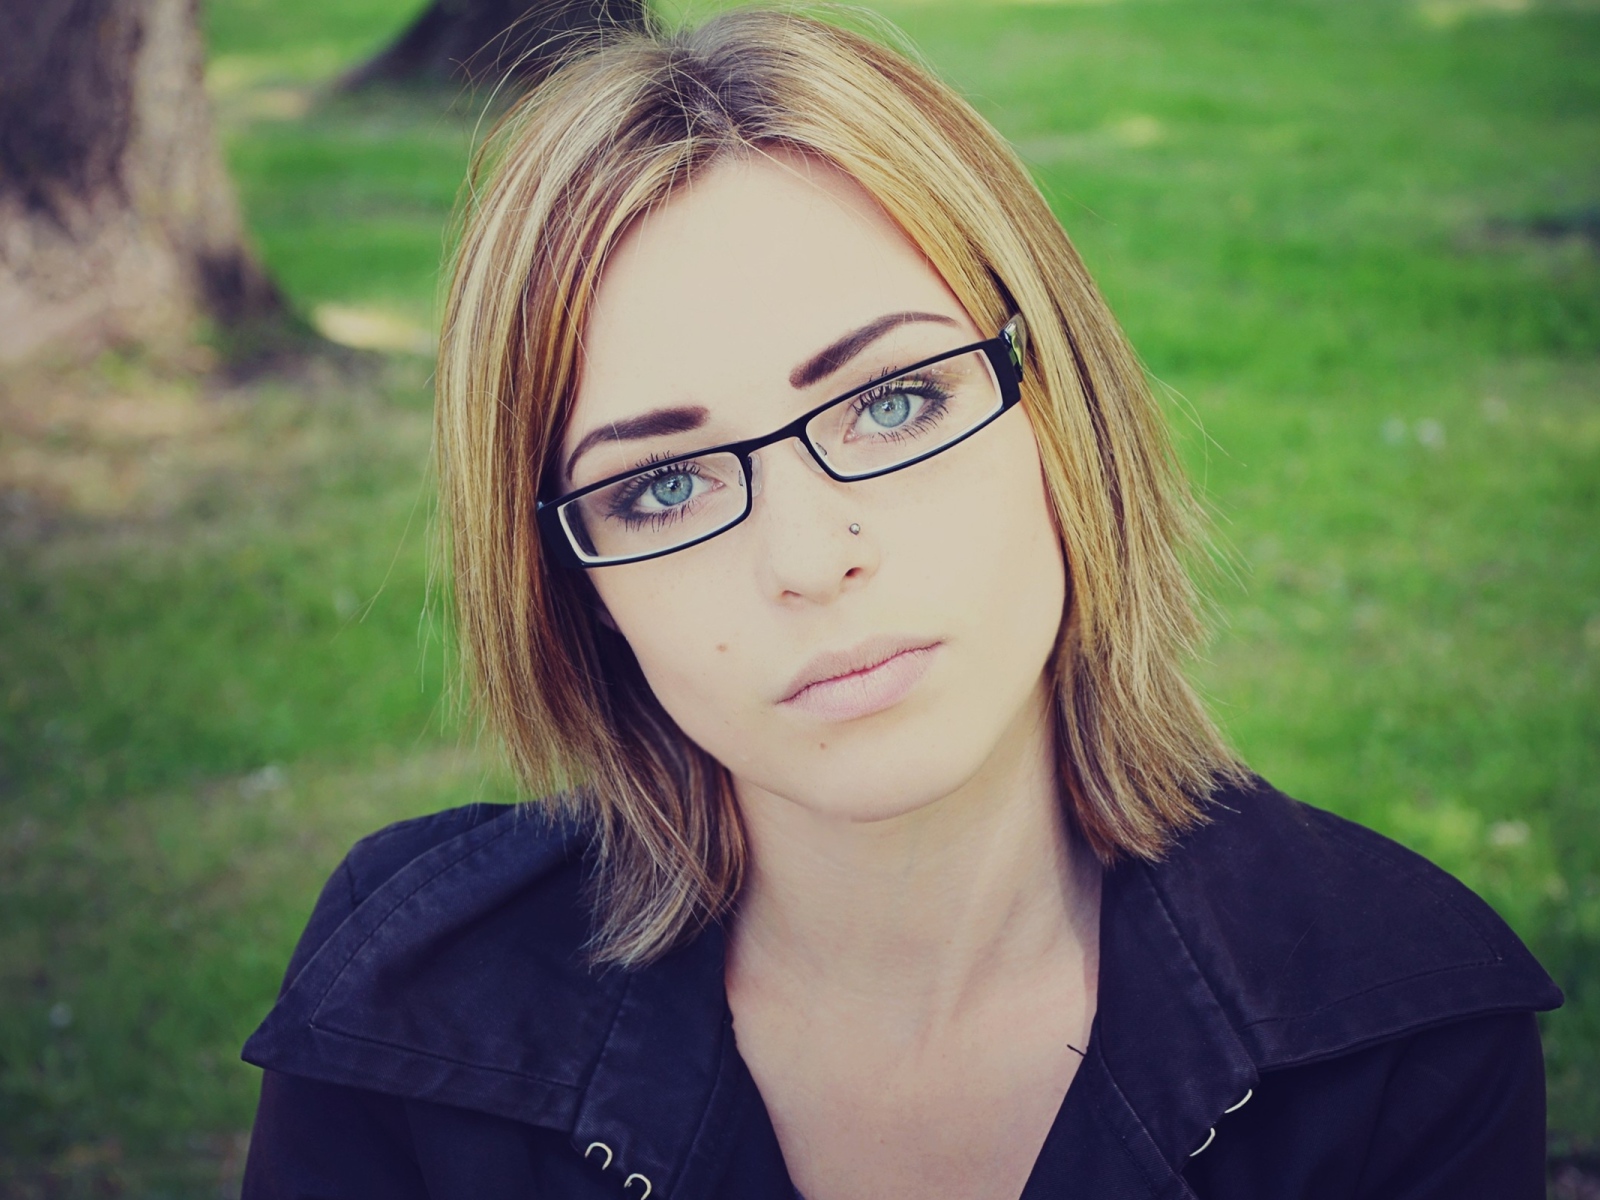 Blonde girl with piercings in the nose with glasses